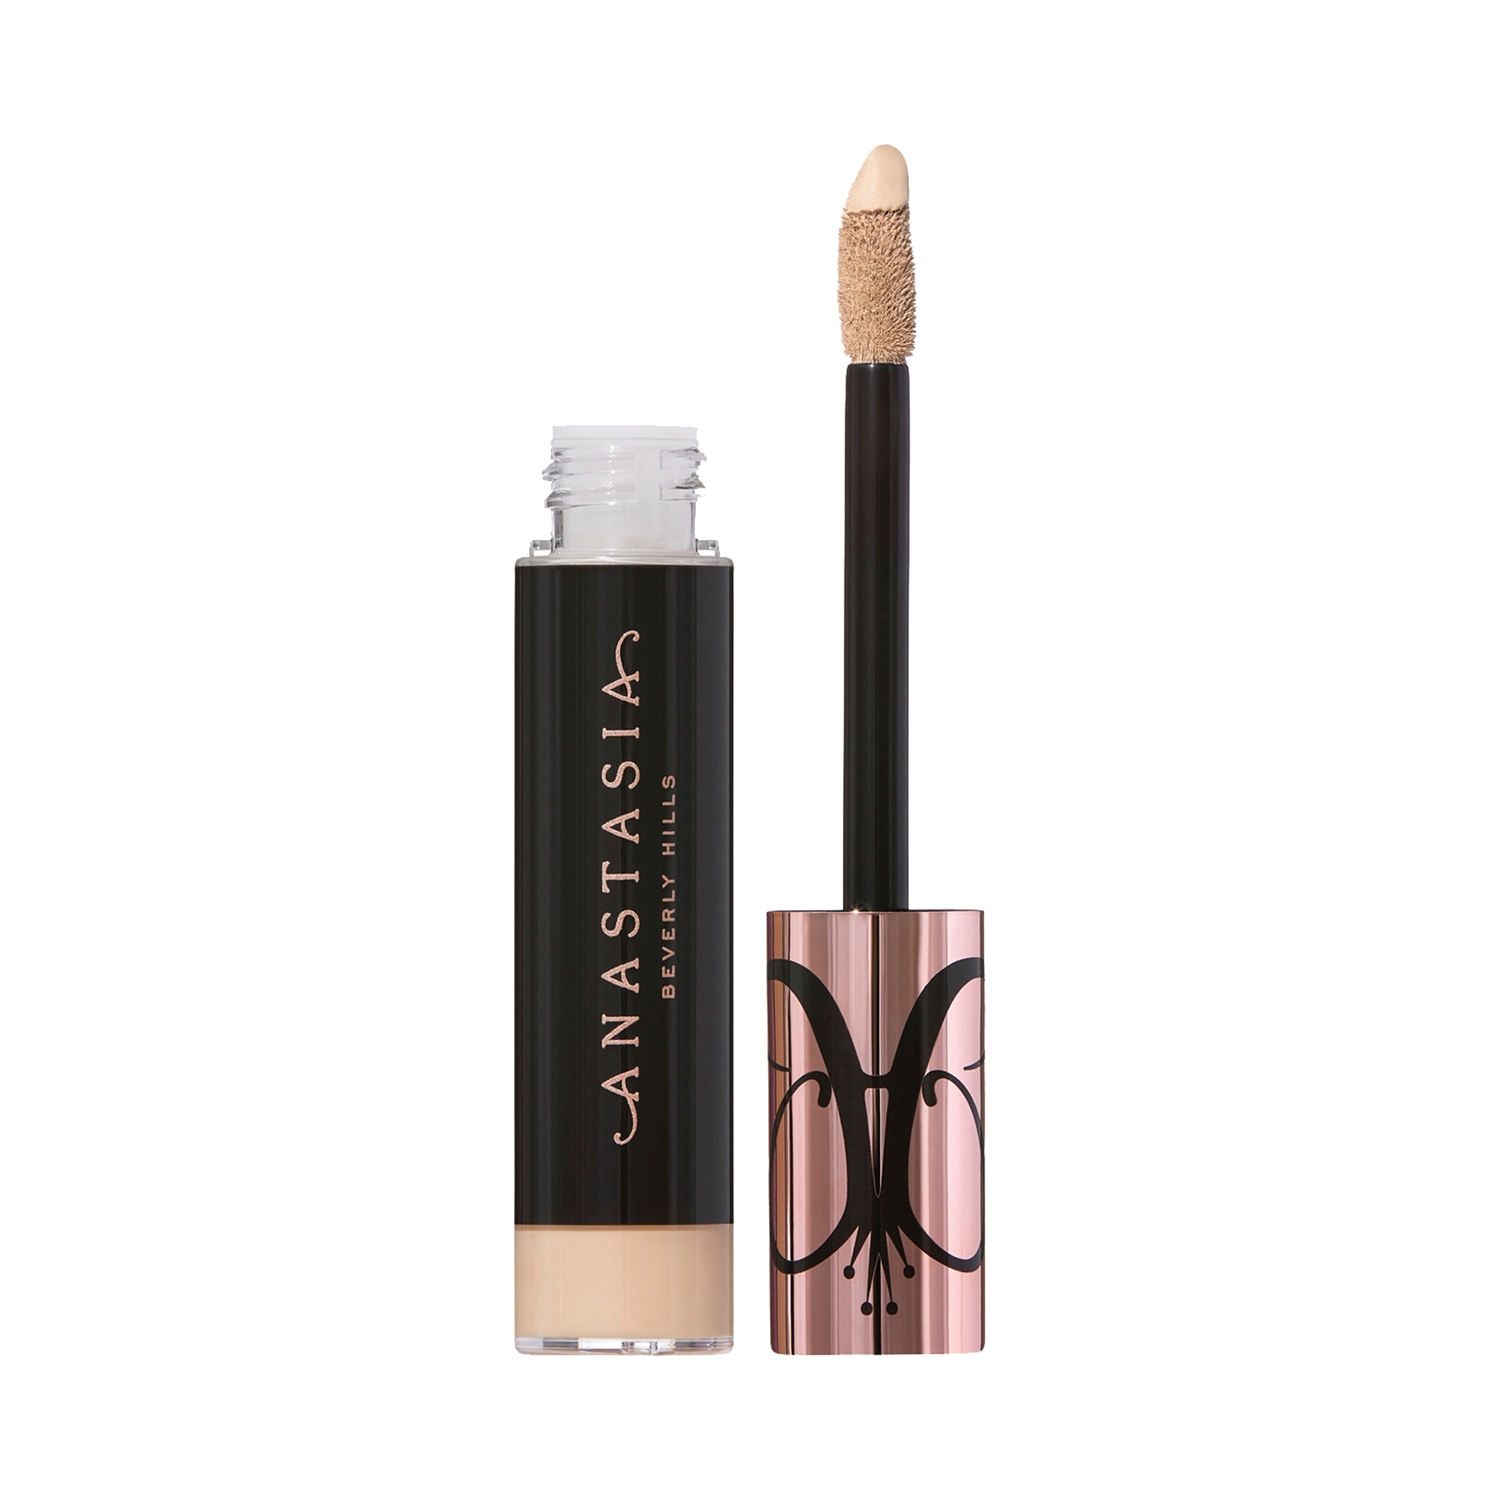 Anastasia Beverly Hills | Anastasia Beverly Hills Magic Touch Concealer - 08 Shade (12ml)